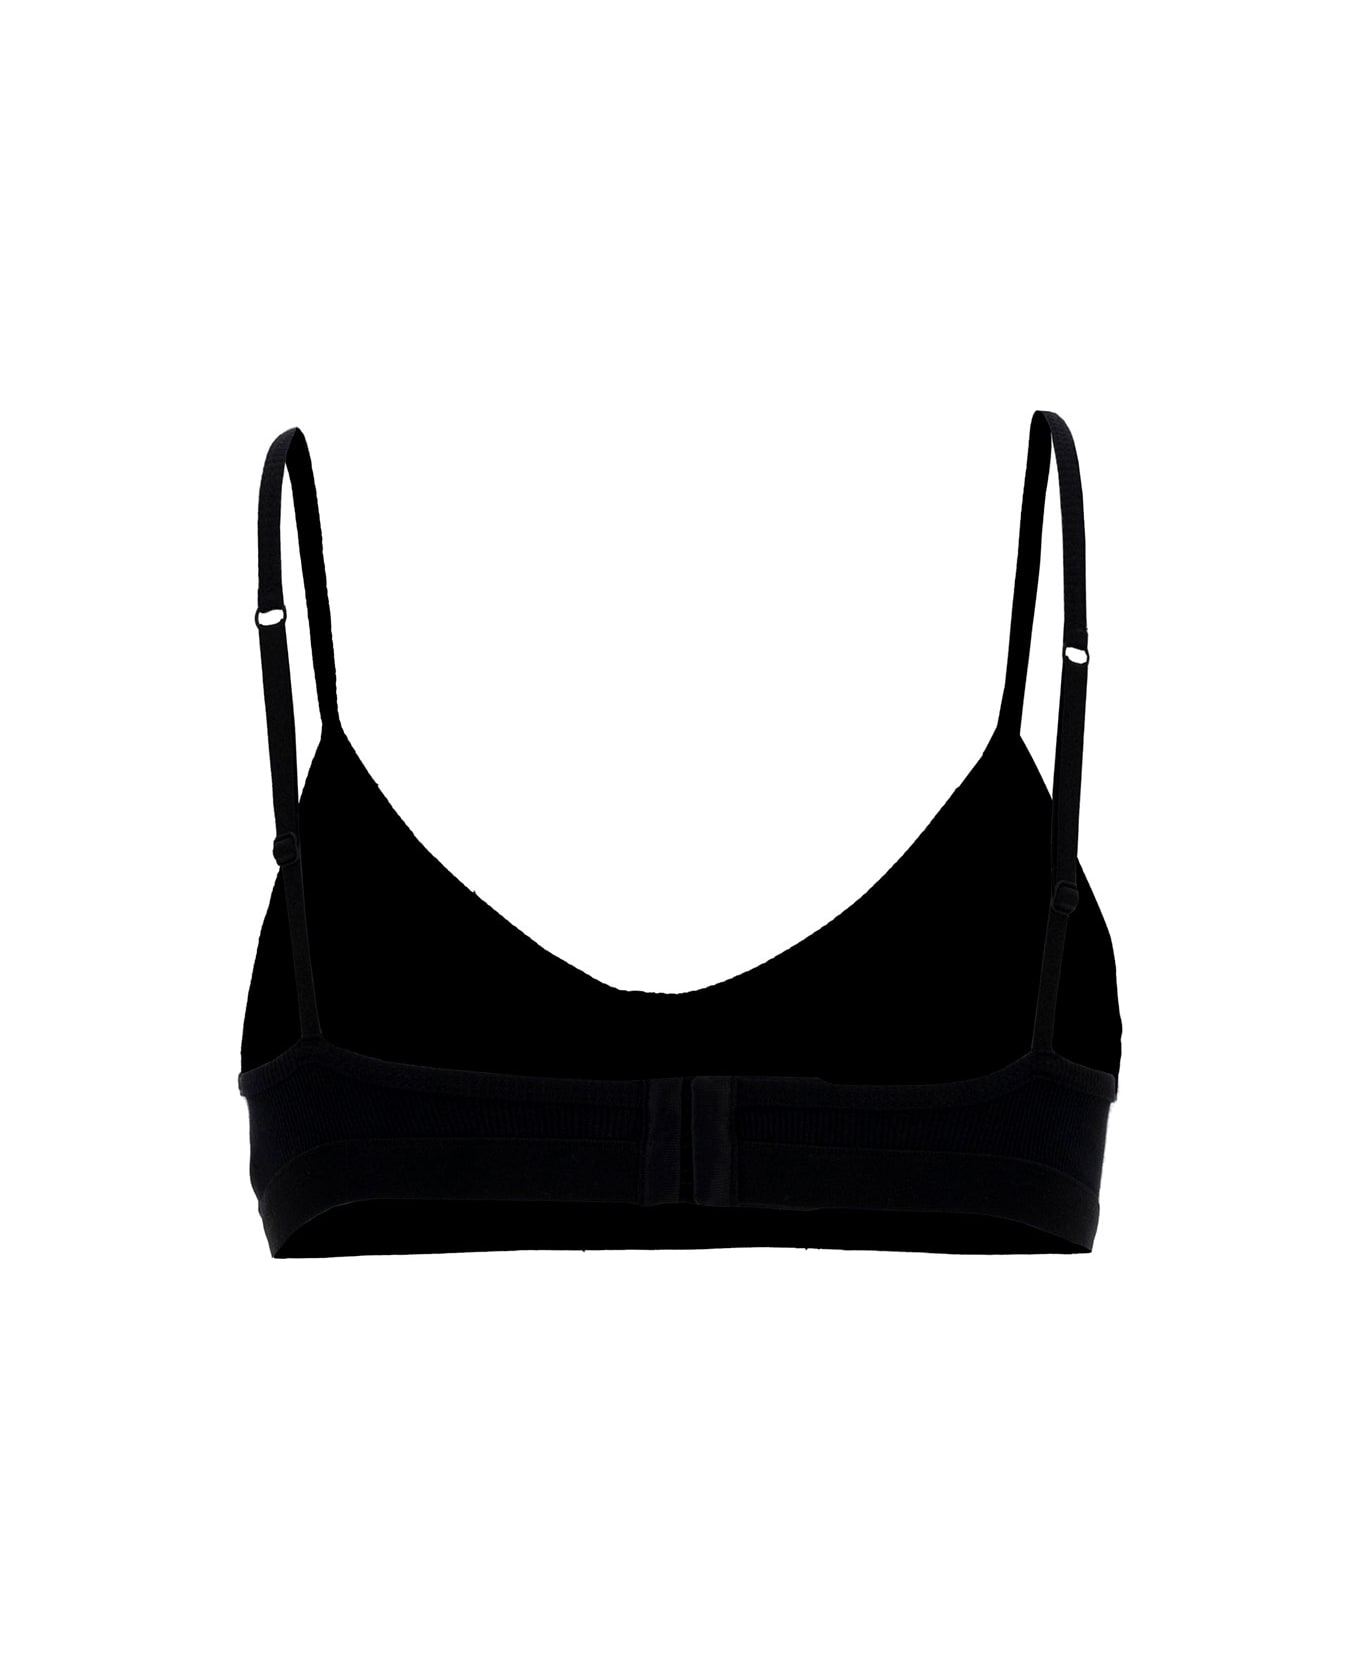 Marine Serre Black Top With Crescent Moon Embroidery In Ribbed Cotton Woman - Black